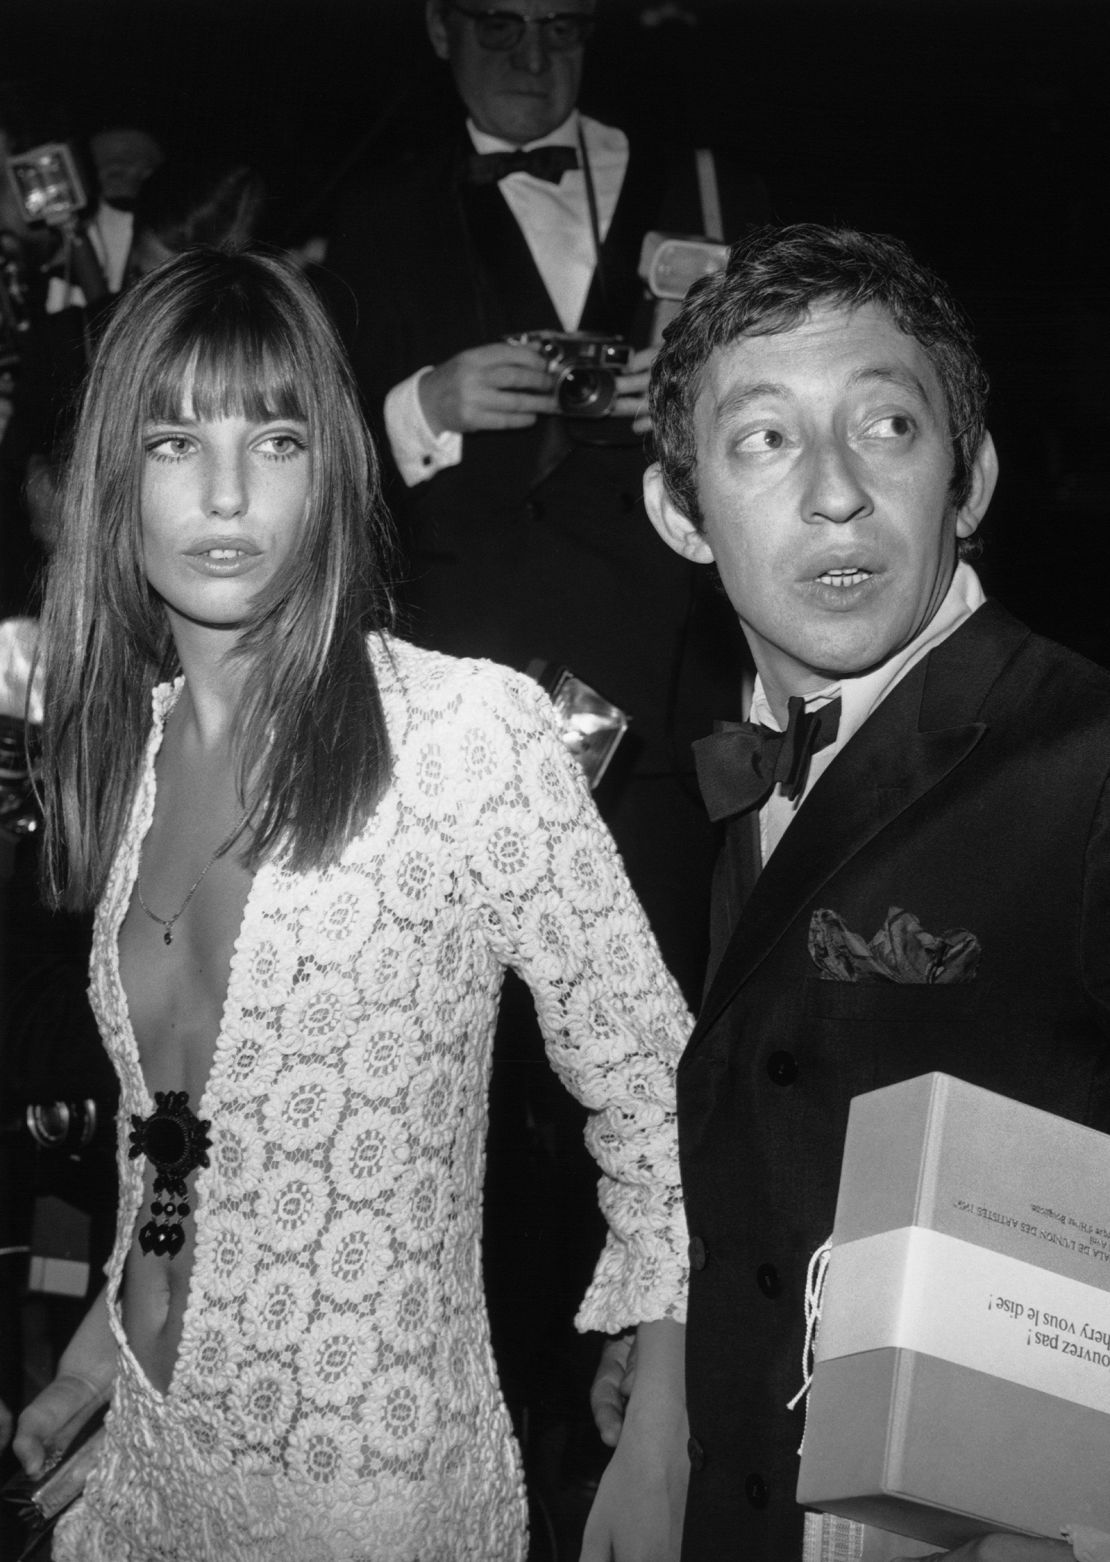 FRANCE - APRIL 25:  Serge GAINSBOURG and Jane BIRKIN arriving at the Artists Union's Gala, Paris.  (Photo by Keystone-France/Gamma-Keystone via Getty Images)